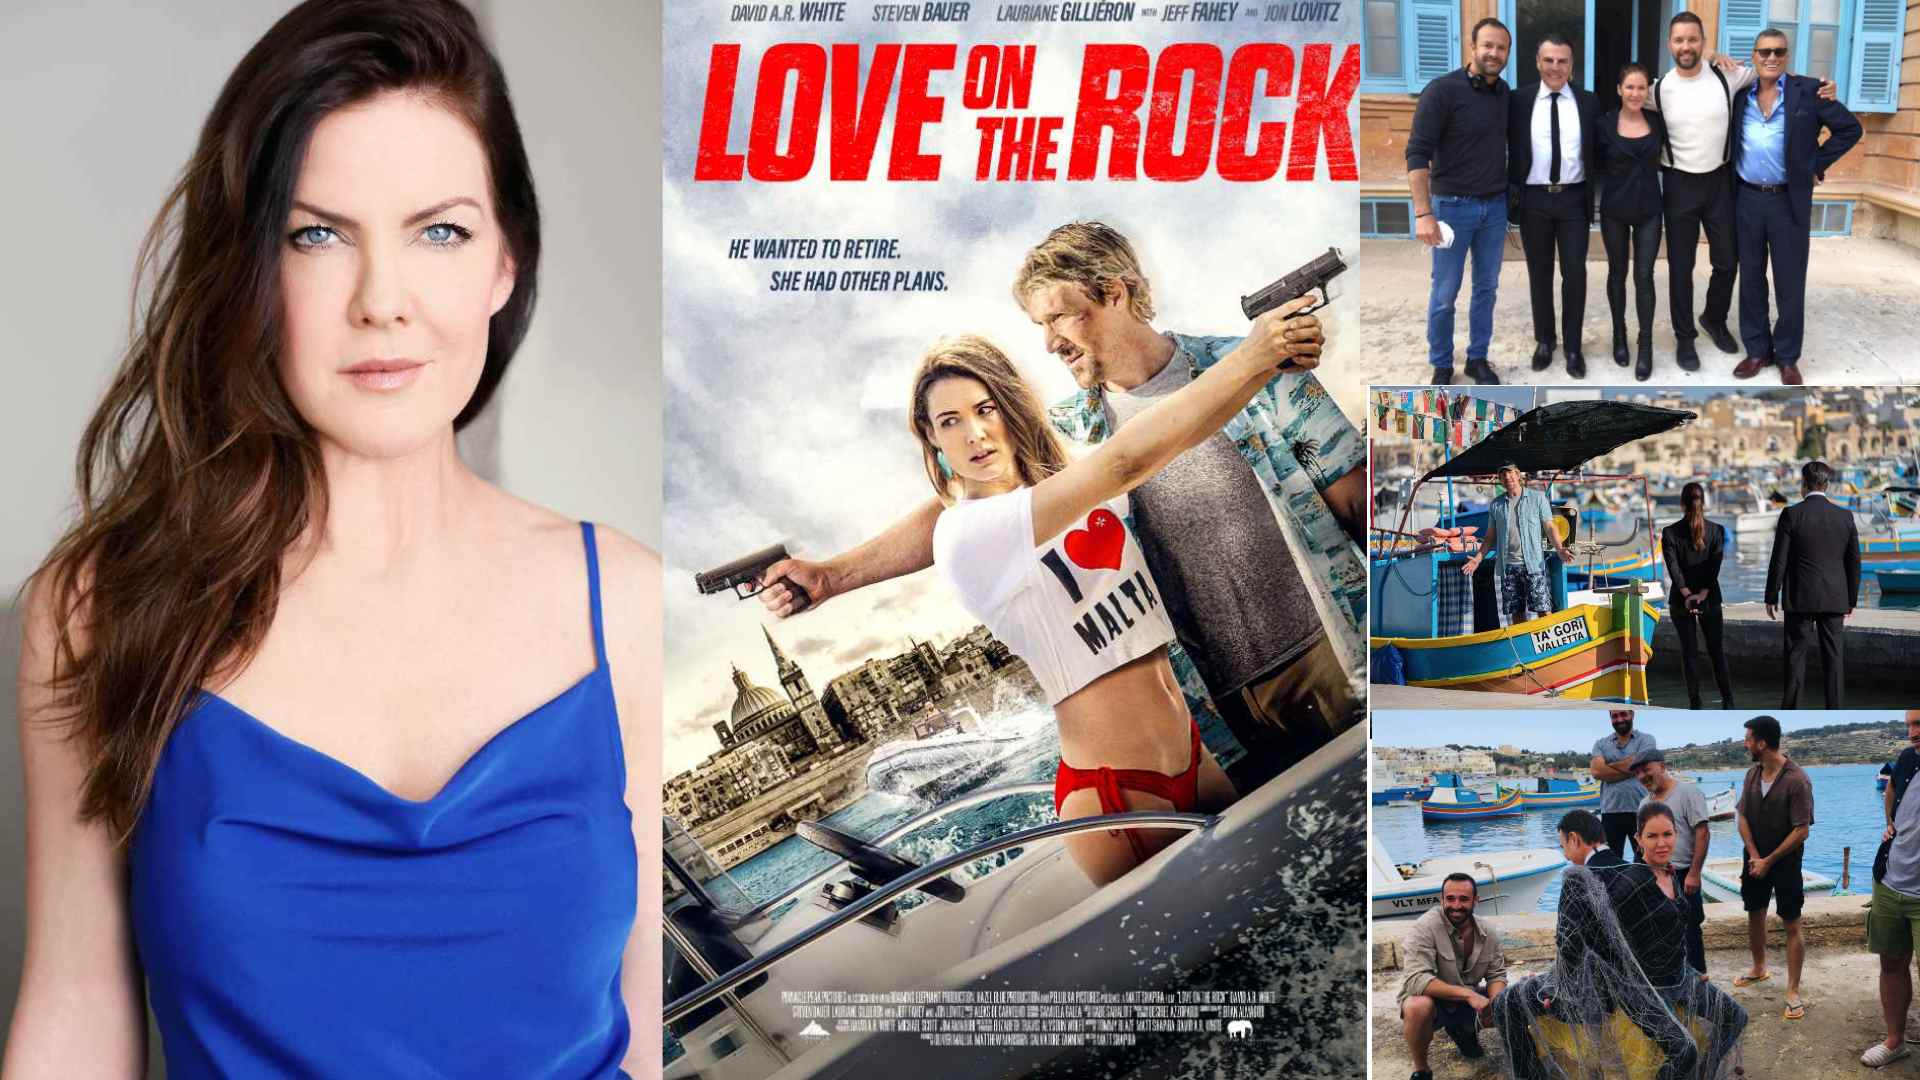 HOLLYWOOD NEWS: KIRA REED LORSCH STARRING IN LATEST MOVIE ‘LOVE ON THE ROCK’ !